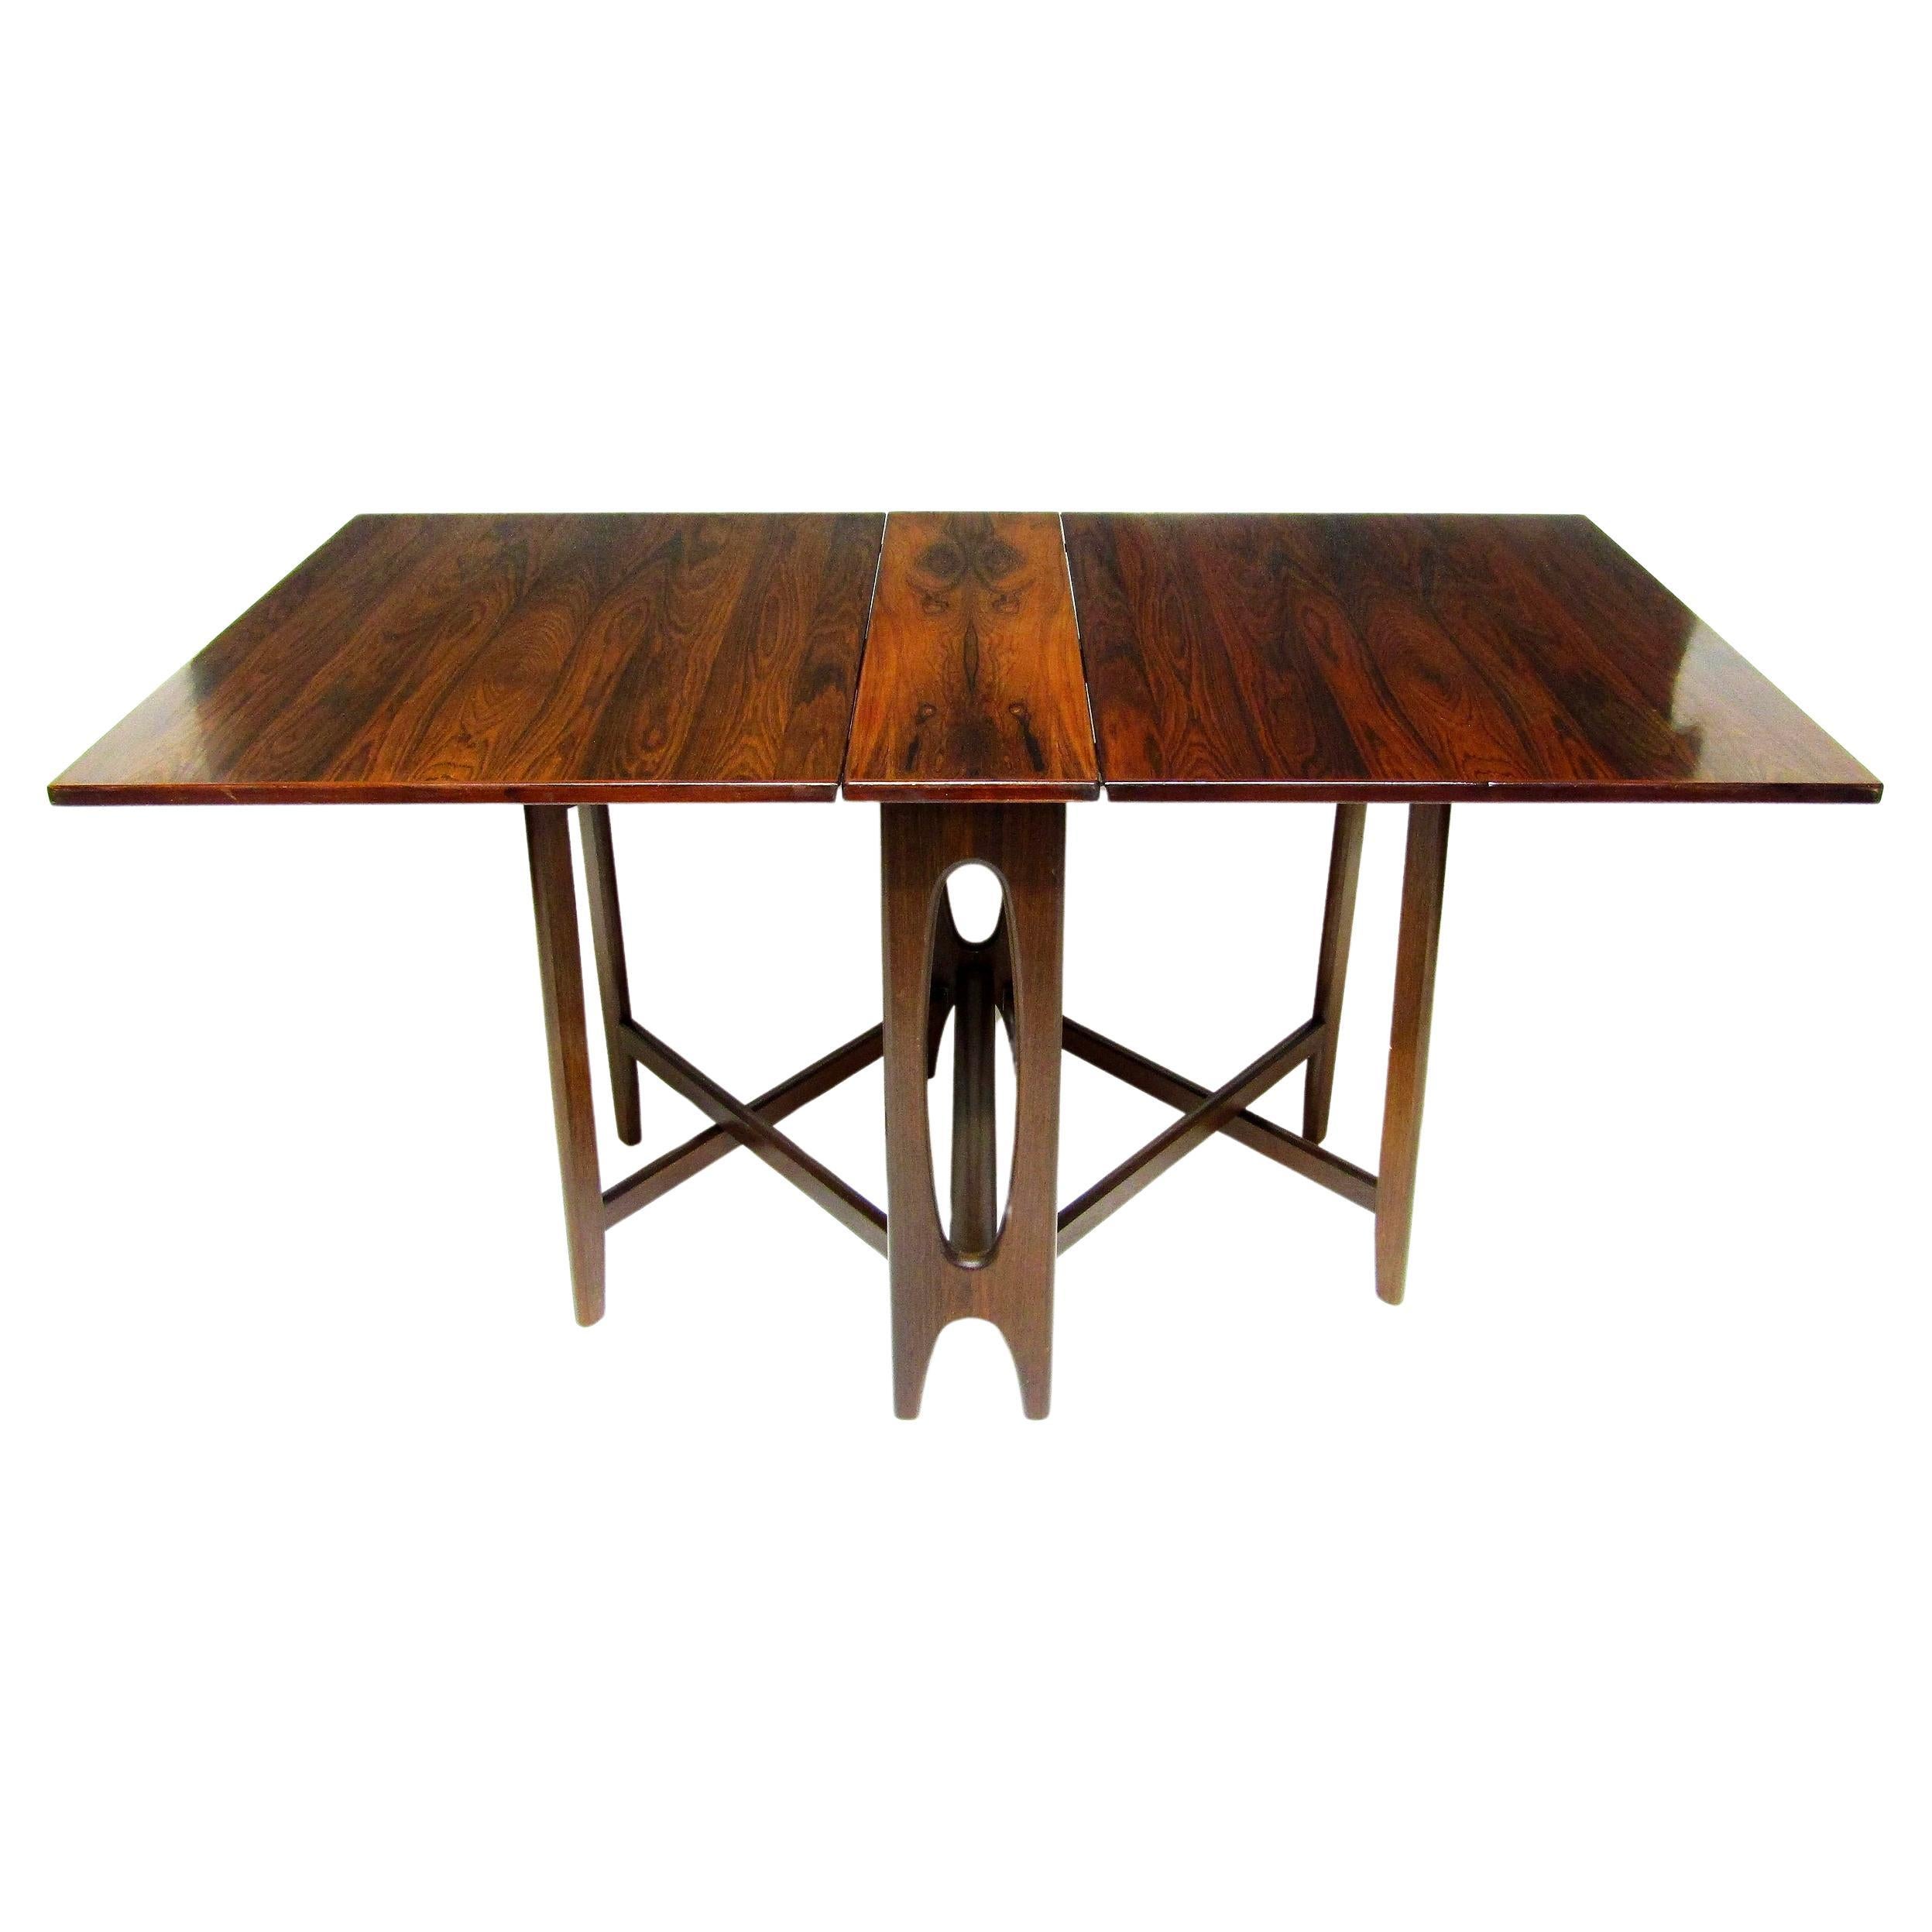 1970s Scandinavian Drop-Leaf Rio Rosewood Extending Dining Table by Bendt Winge For Sale